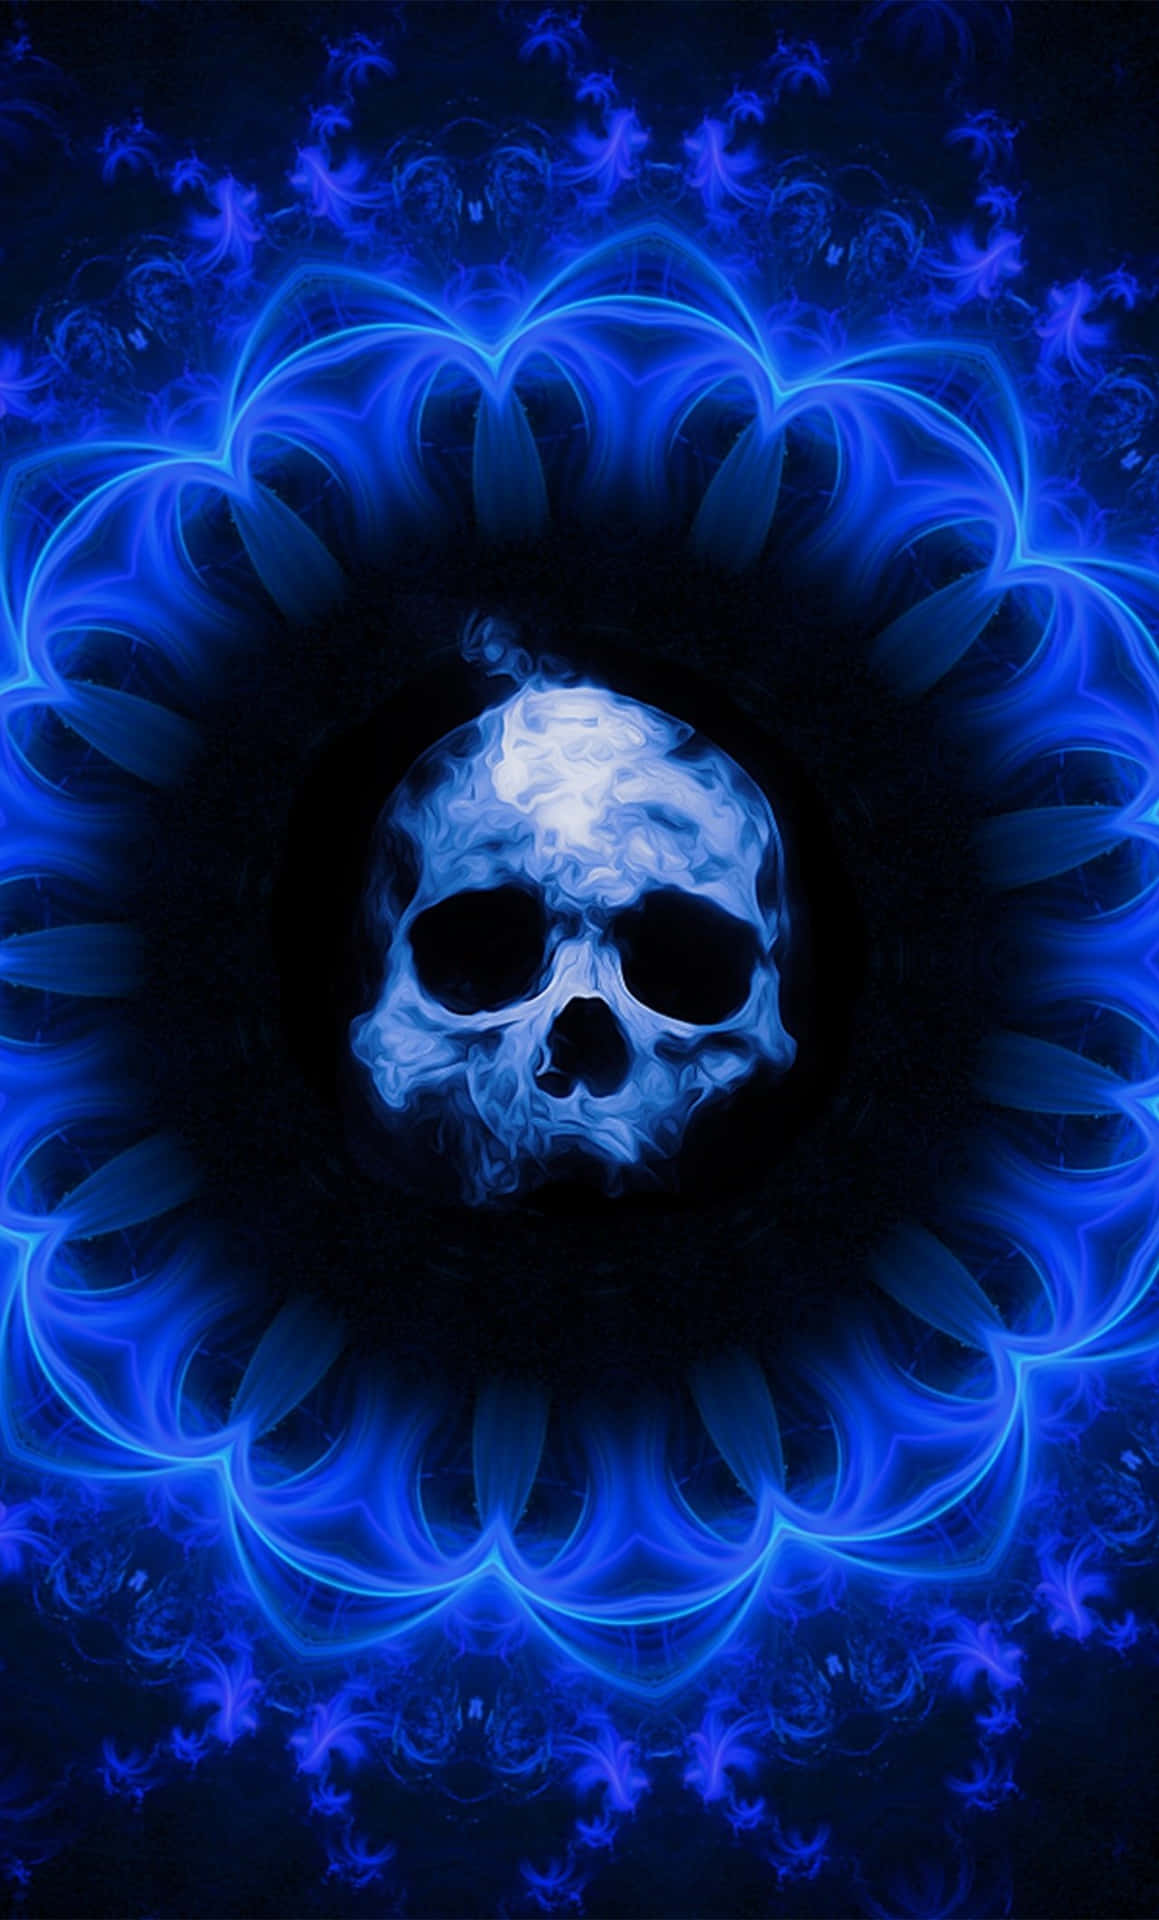 Glowing Blue Skull Gothic Iphone Wallpaper